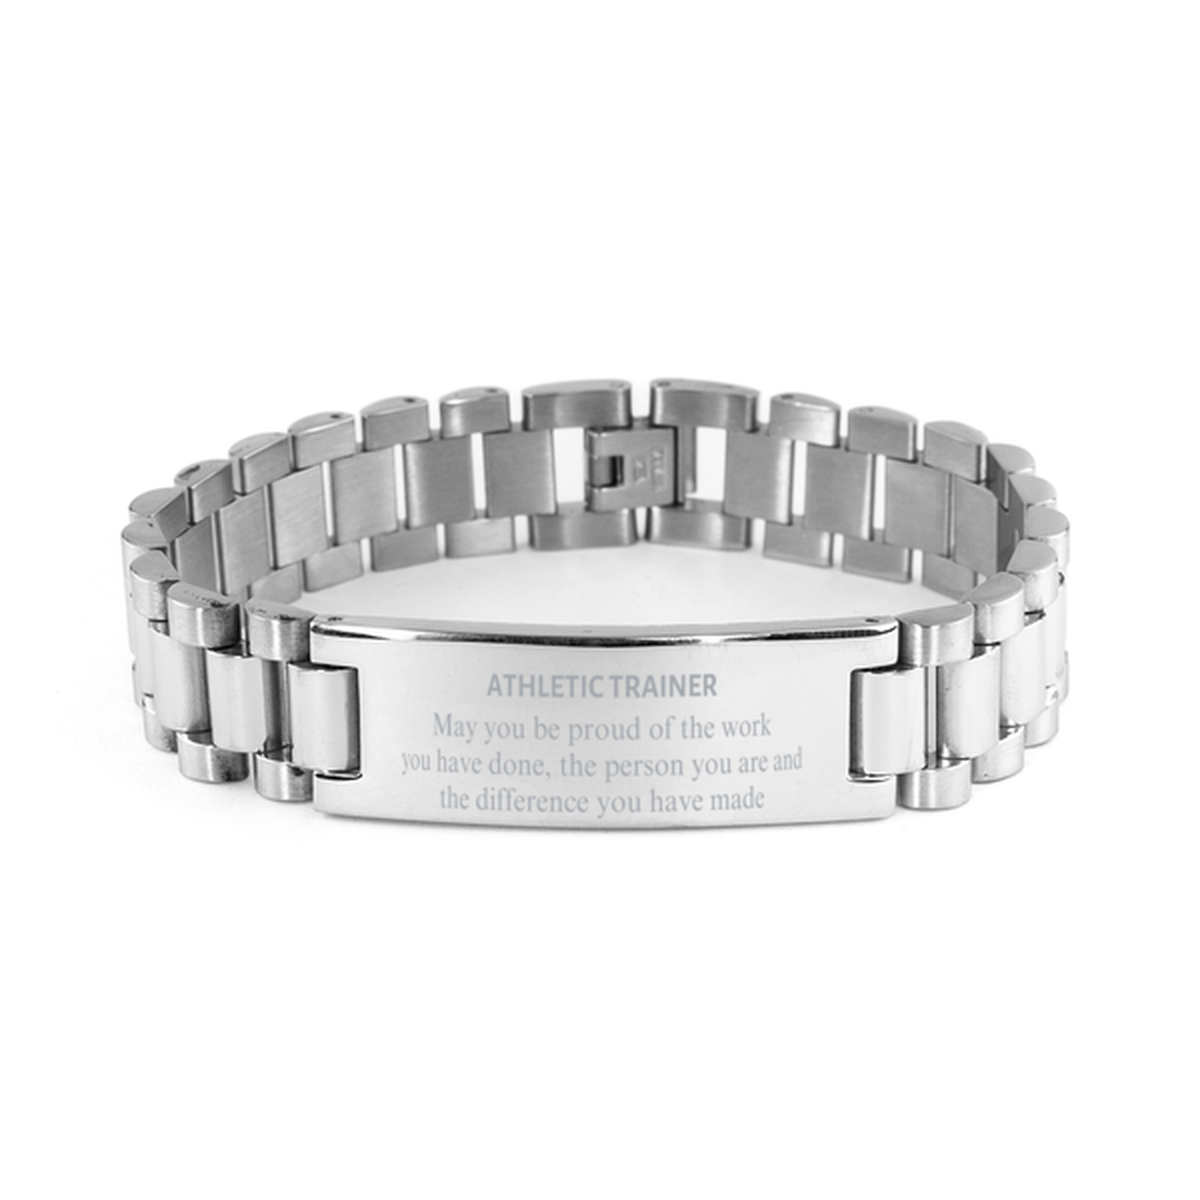 Athletic Trainer May you be proud of the work you have done, Retirement Athletic Trainer Ladder Stainless Steel Bracelet for Colleague Appreciation Gifts Amazing for Athletic Trainer